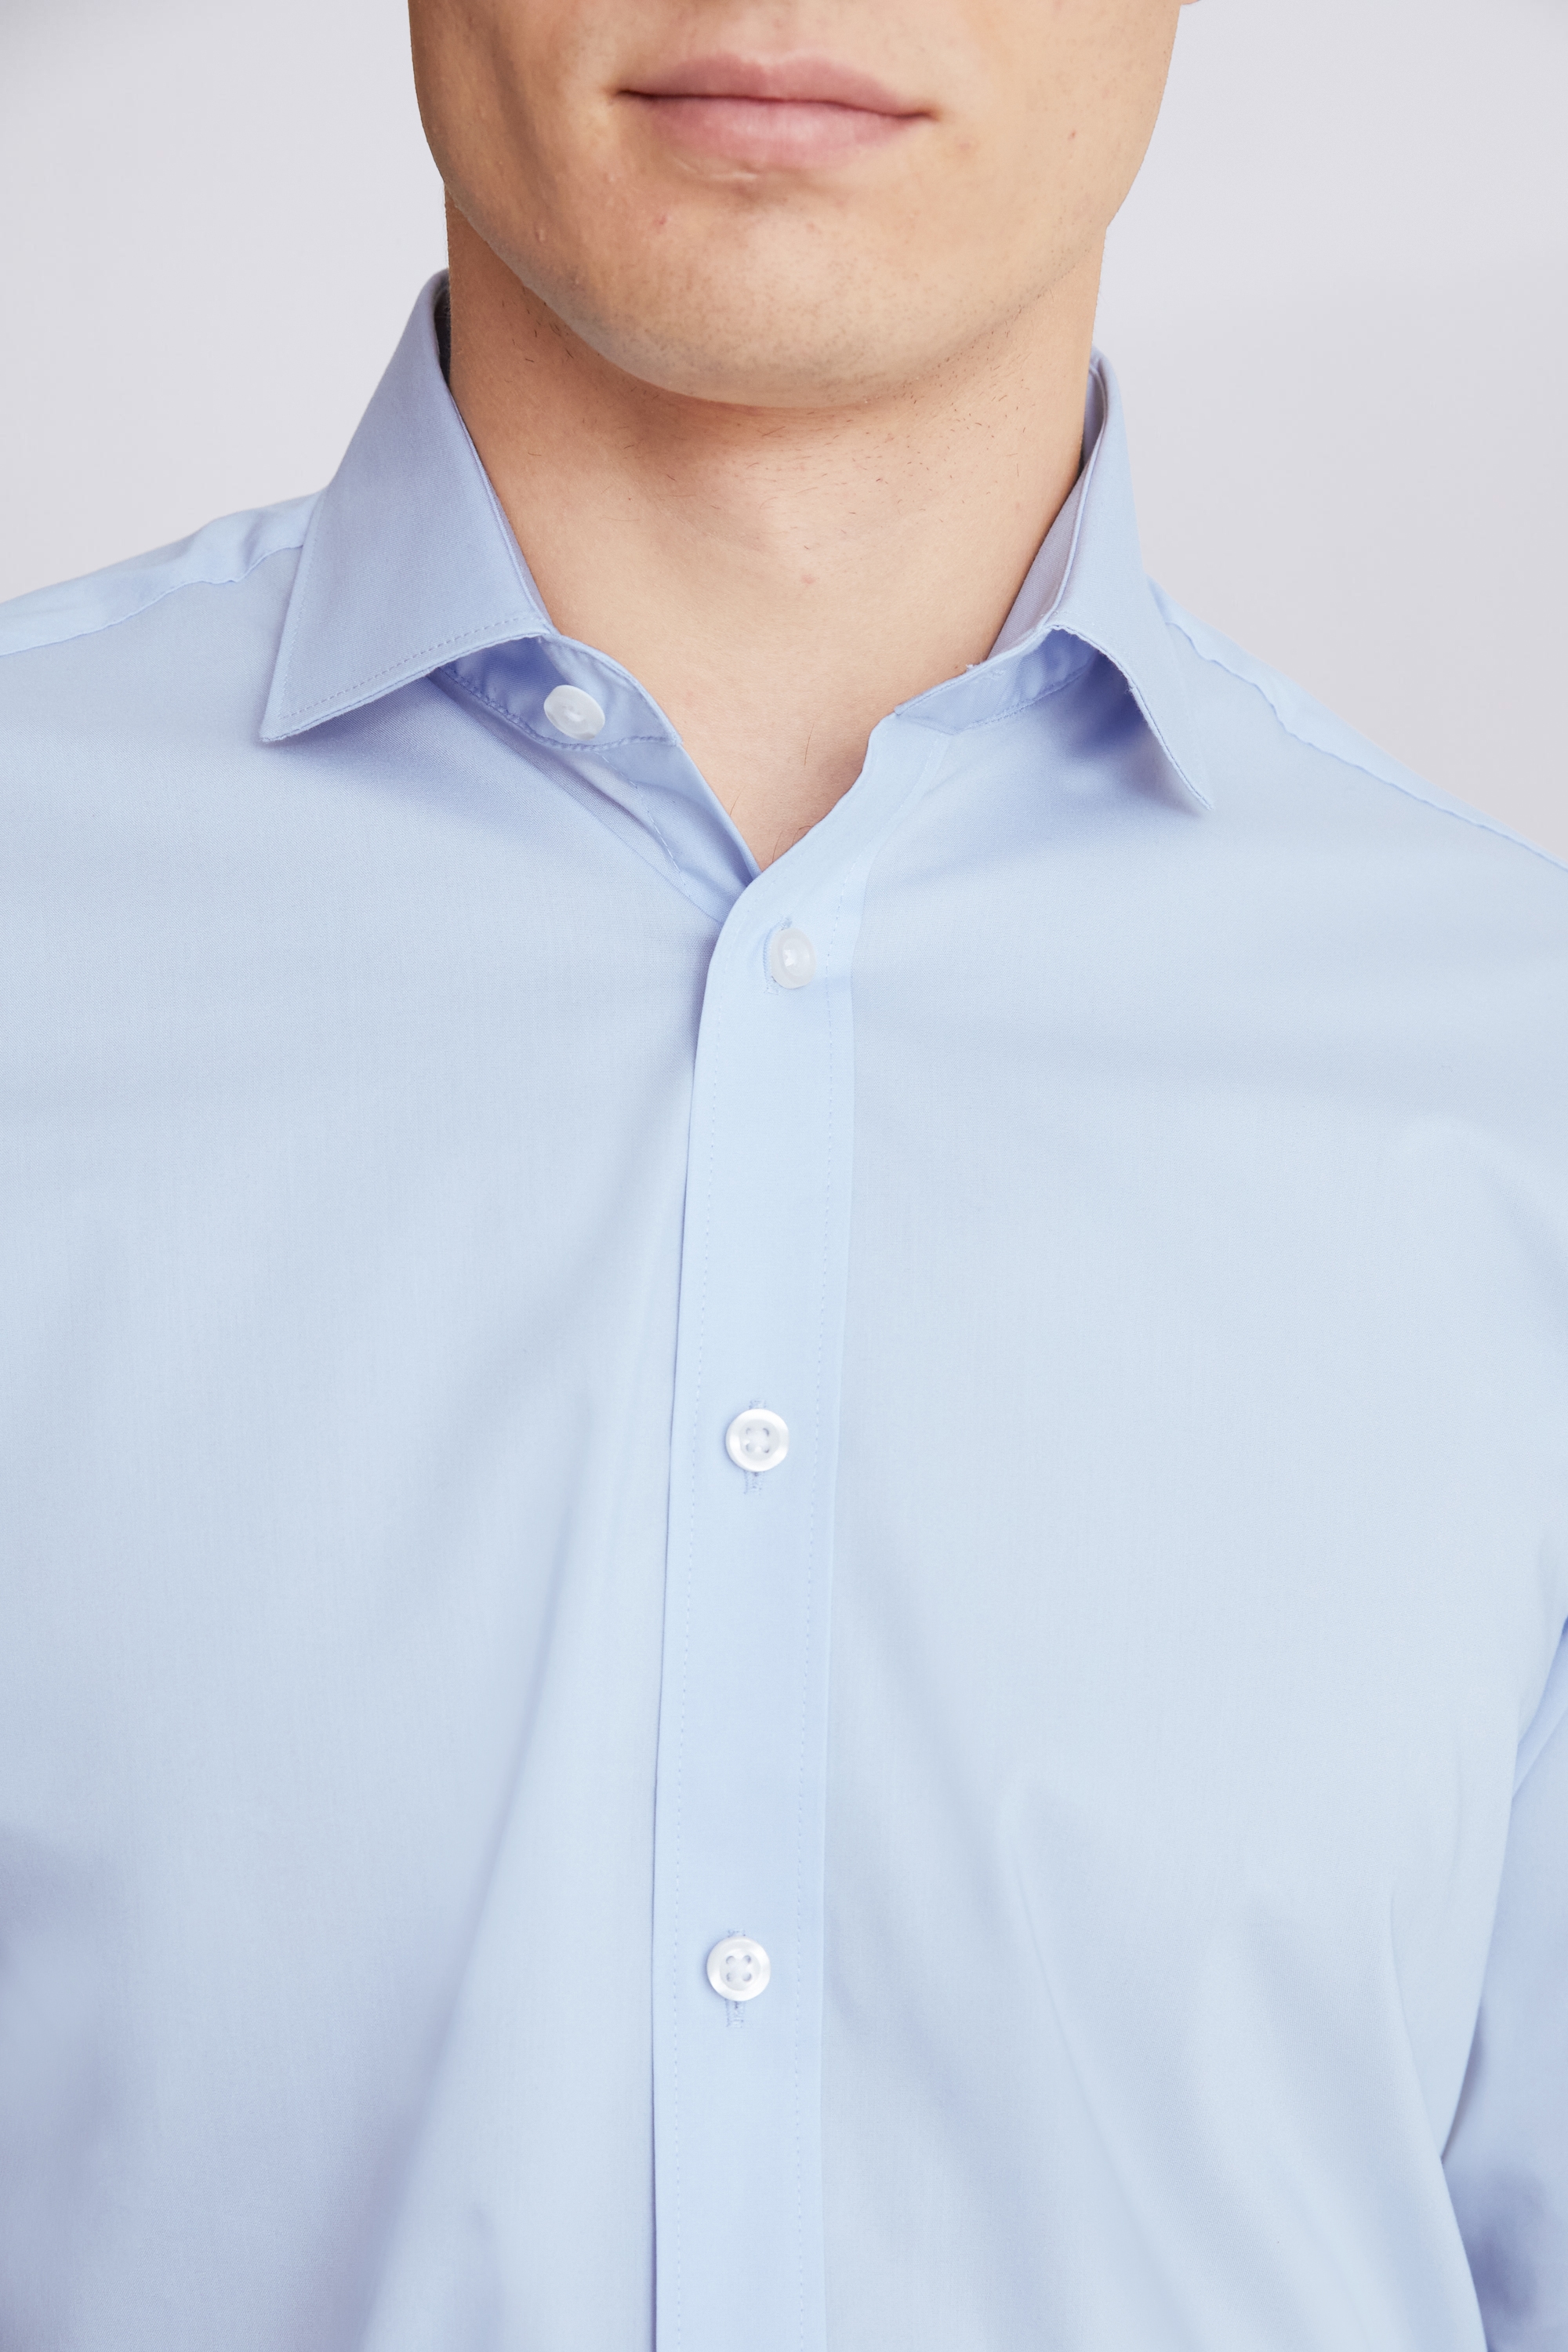 Tailored Fit Sky Stretch Shirt | Buy Online at Moss